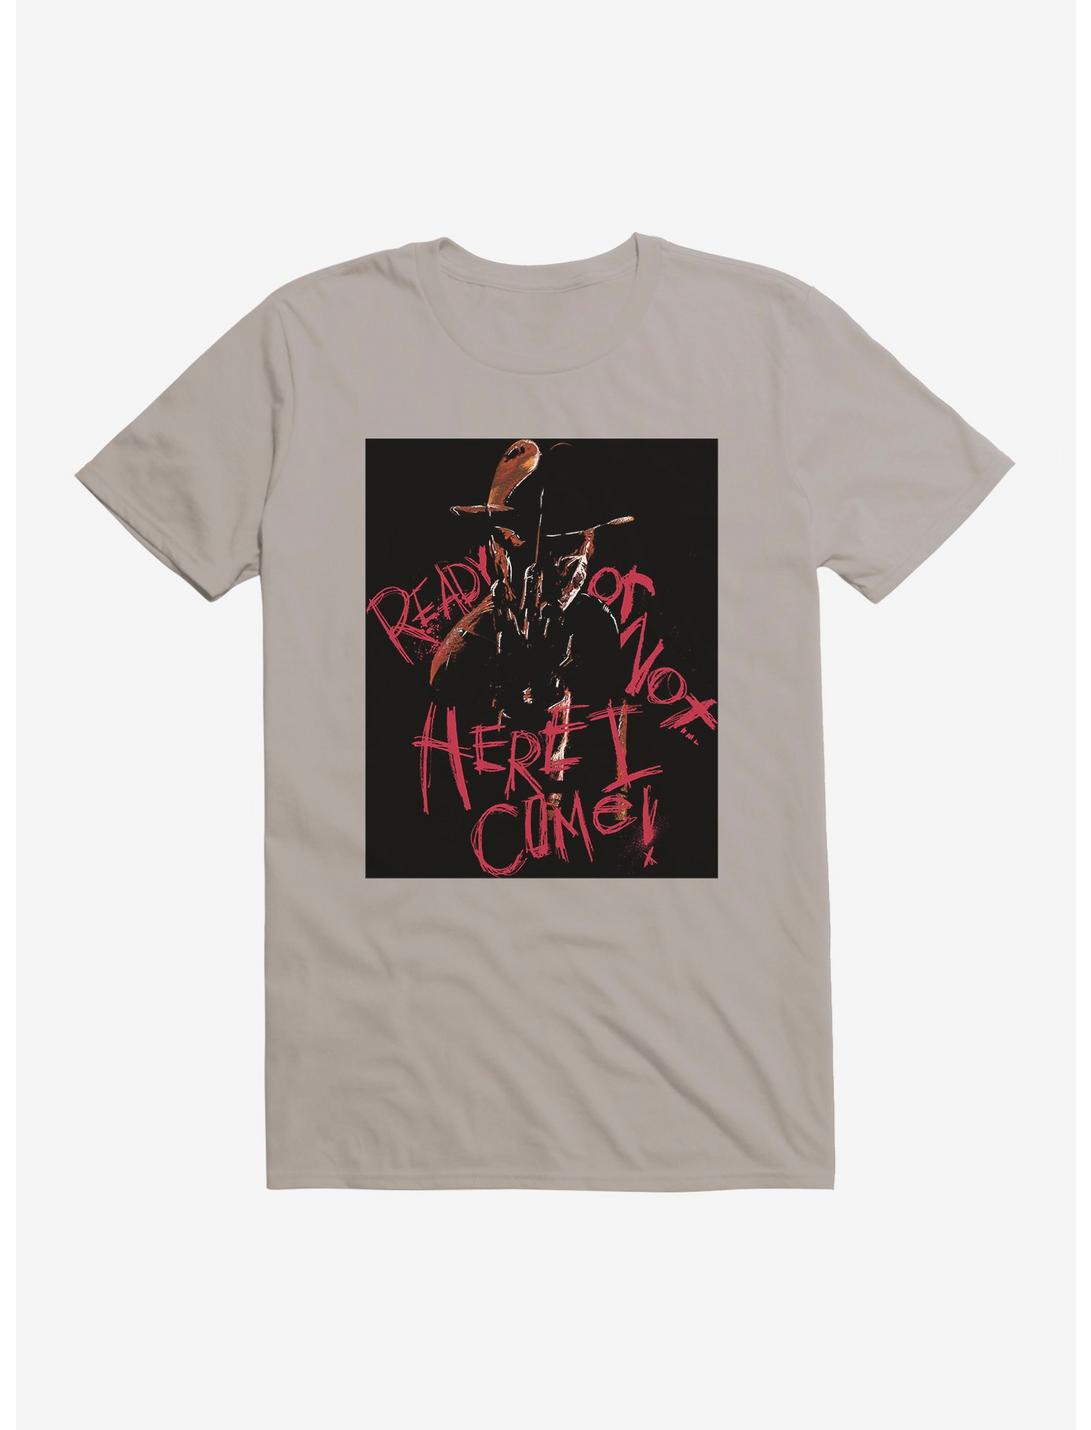 A Nightmare On Elm Street Ready Or Not T-Shirt, LIGHT GREY, hi-res